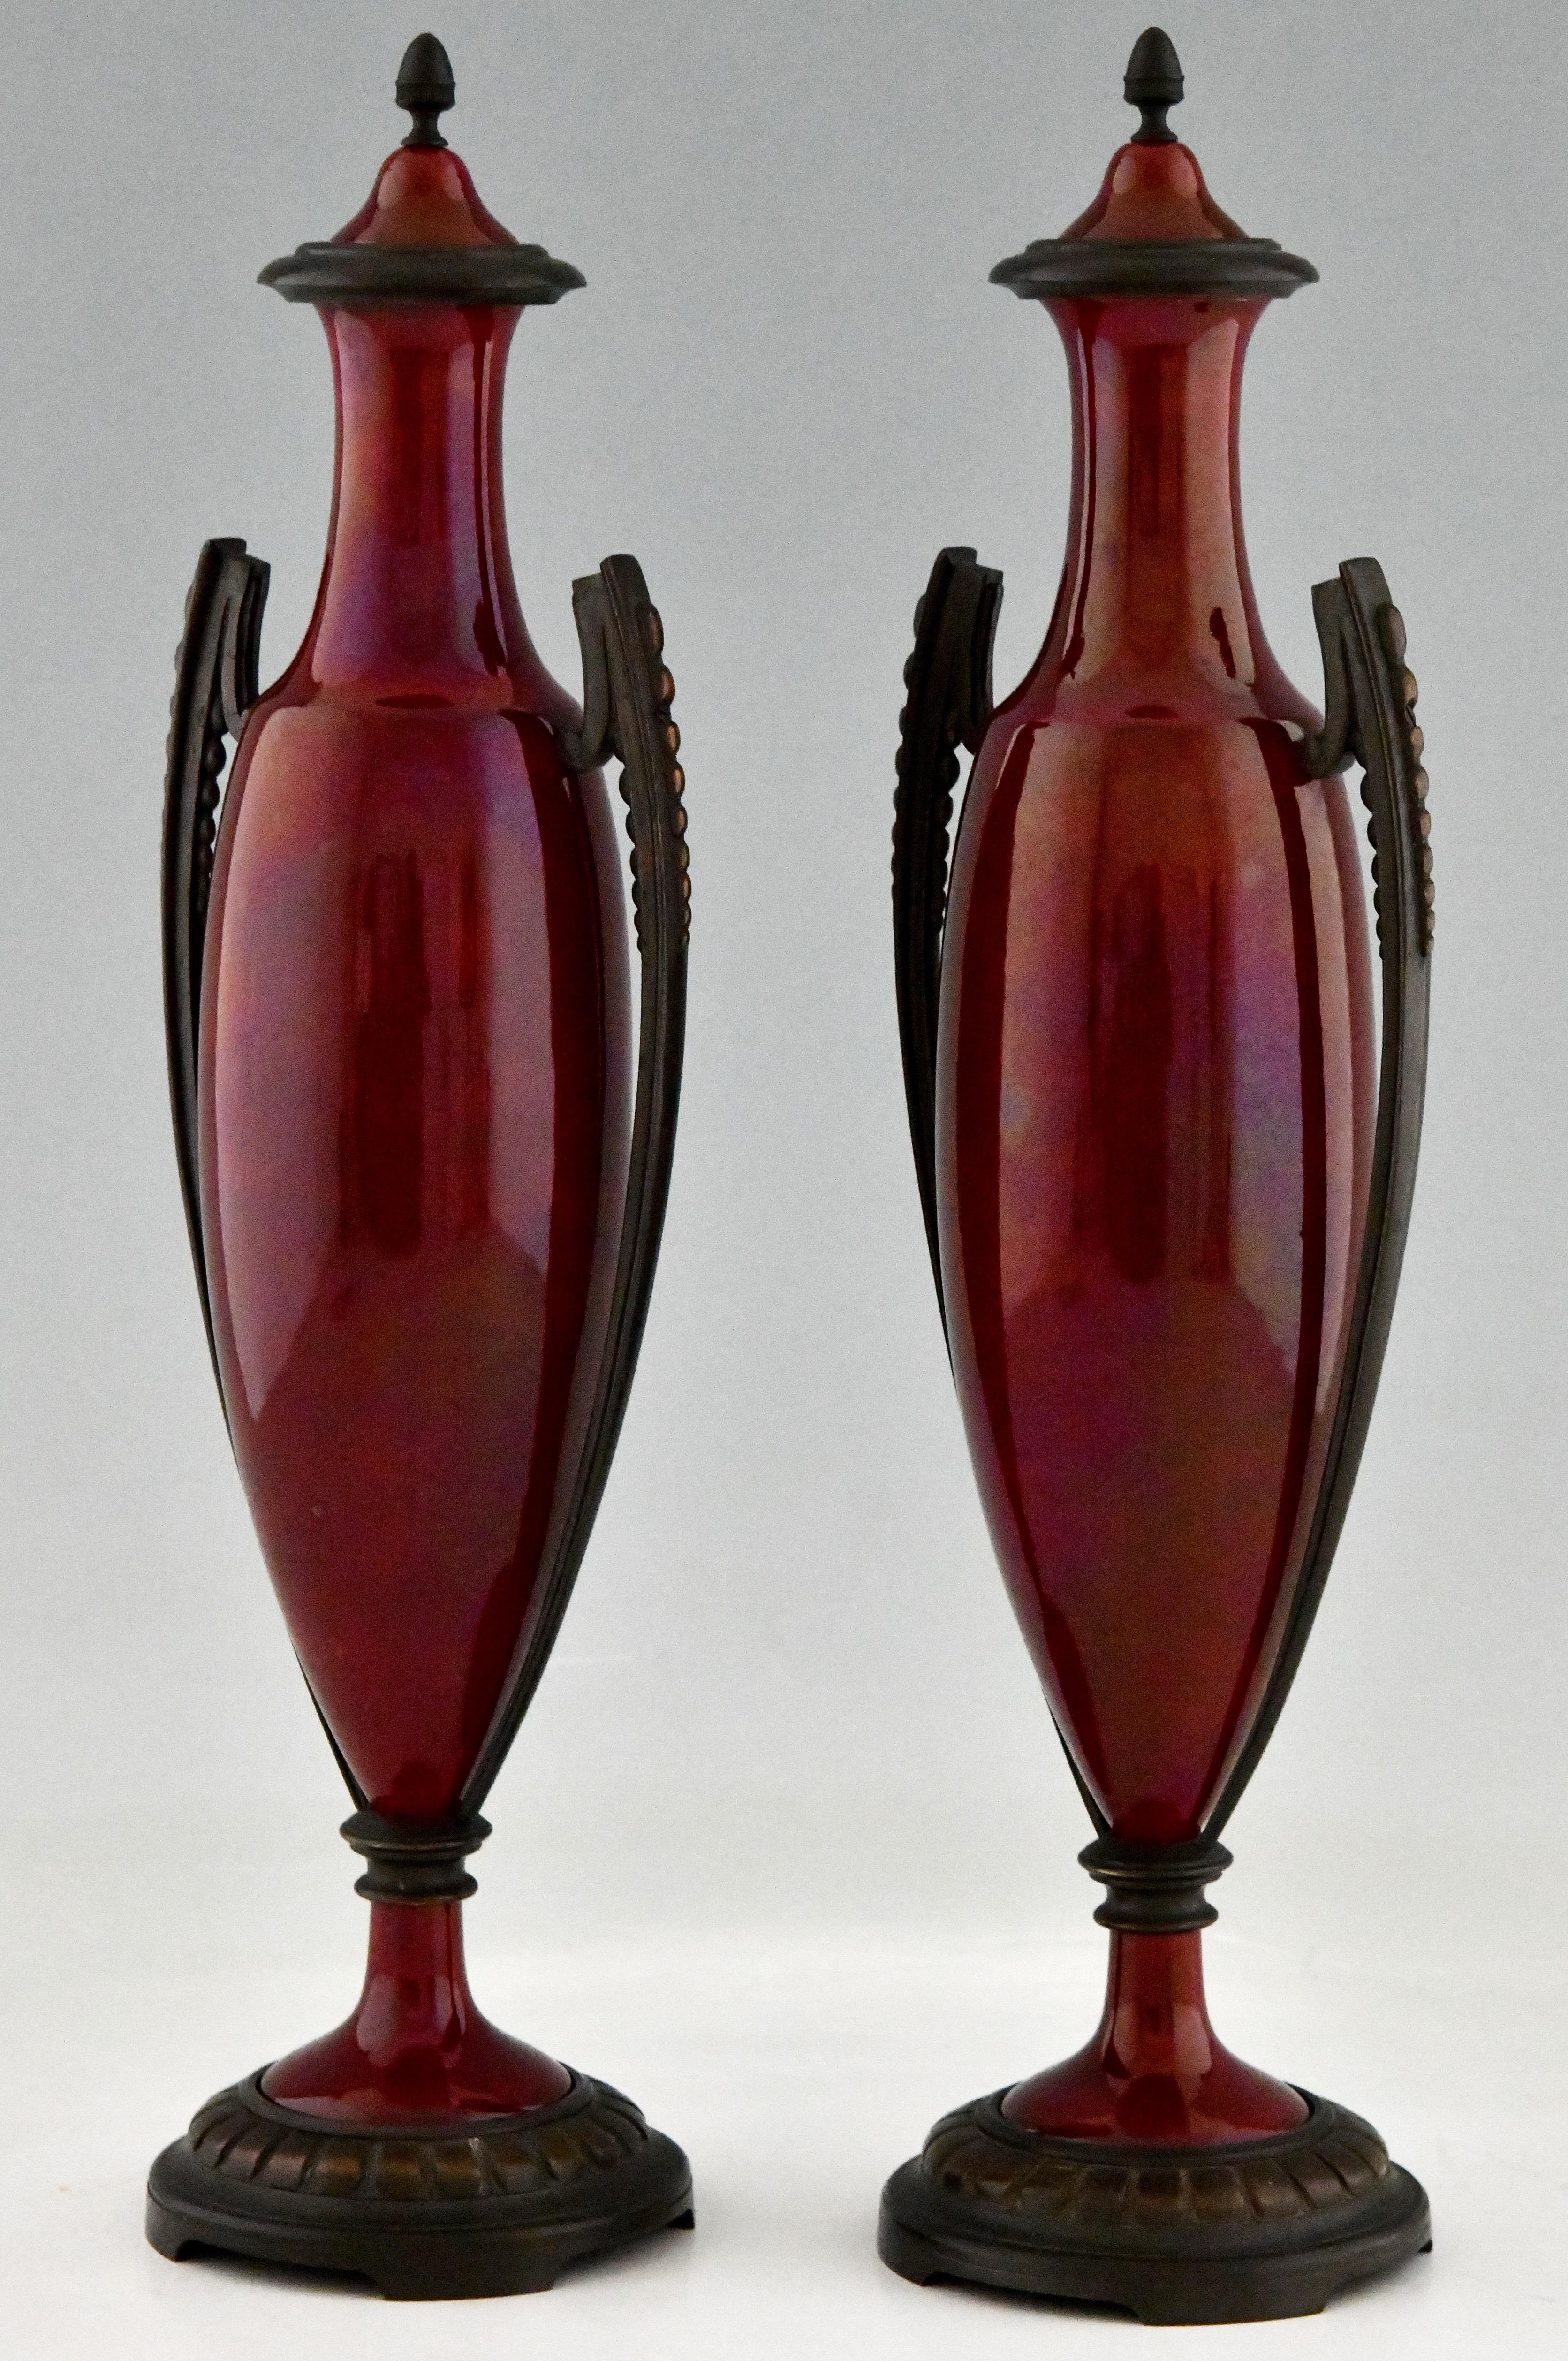 Pair of French red ceramic Art Deco vases or urns with dark red glaze and bronze decorations. Paul Milet (1870-1950) son of Optat Milet. France 1920.